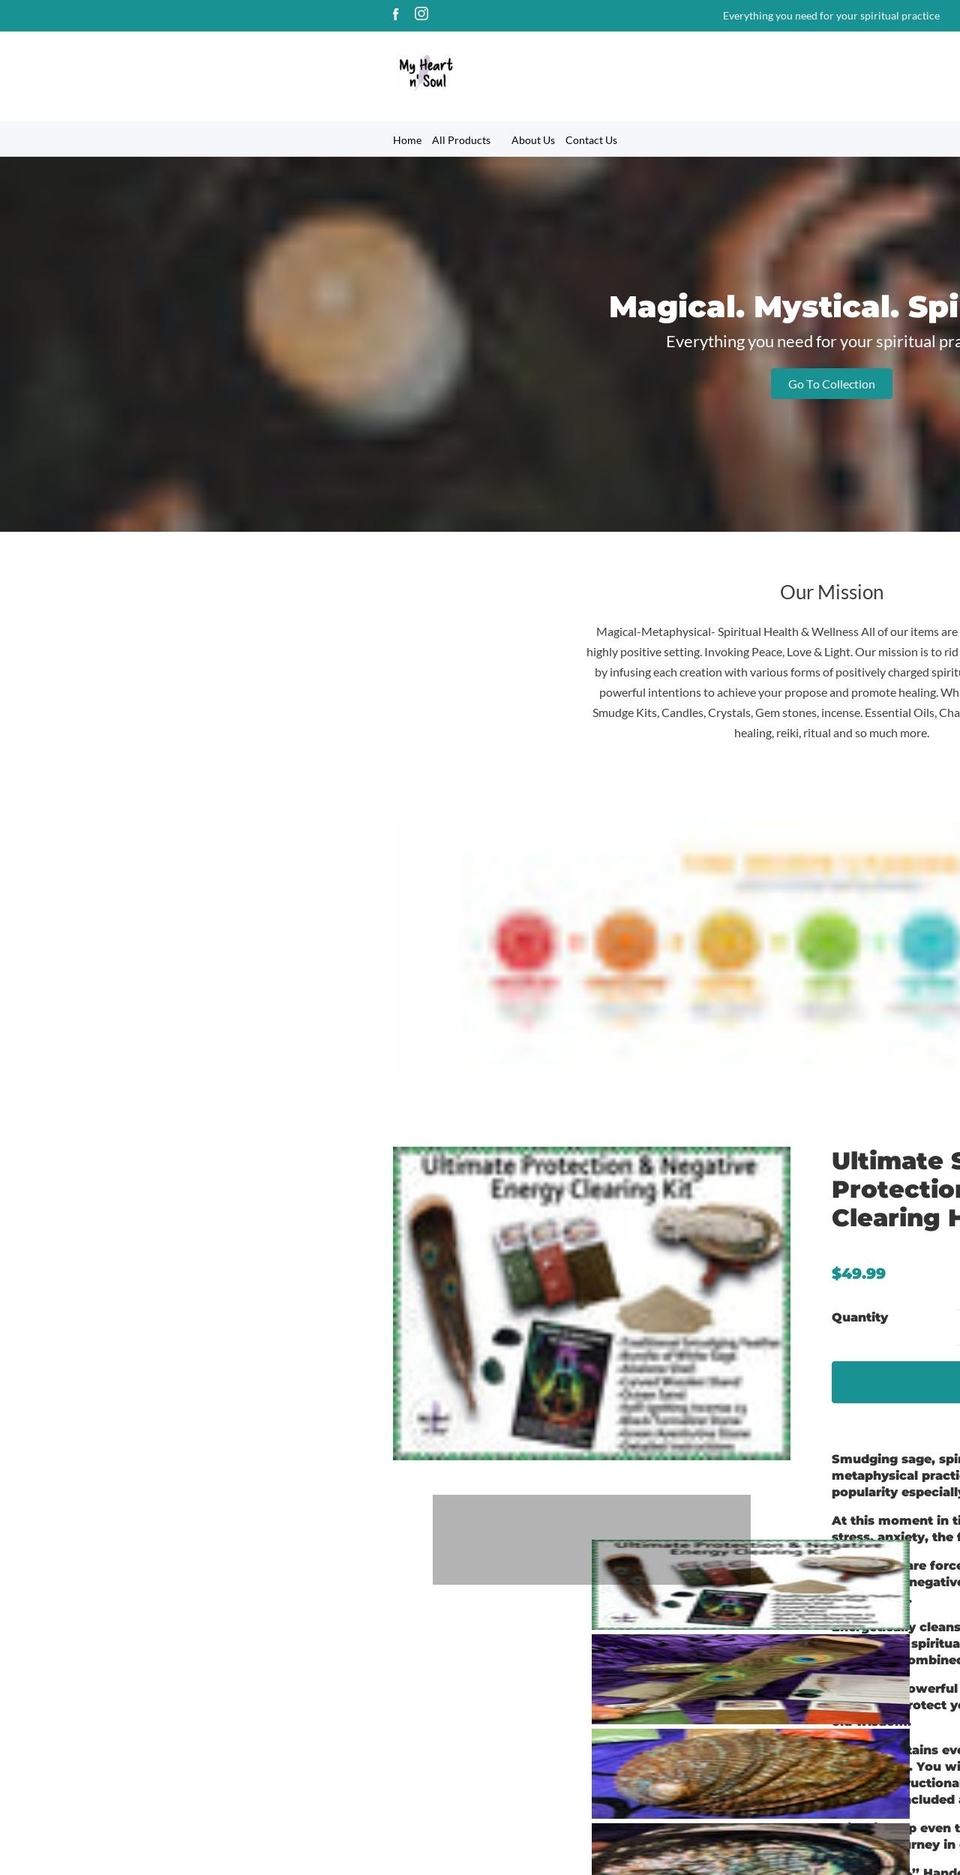 EcomSolid Shopify theme site example myheartnsoul.com